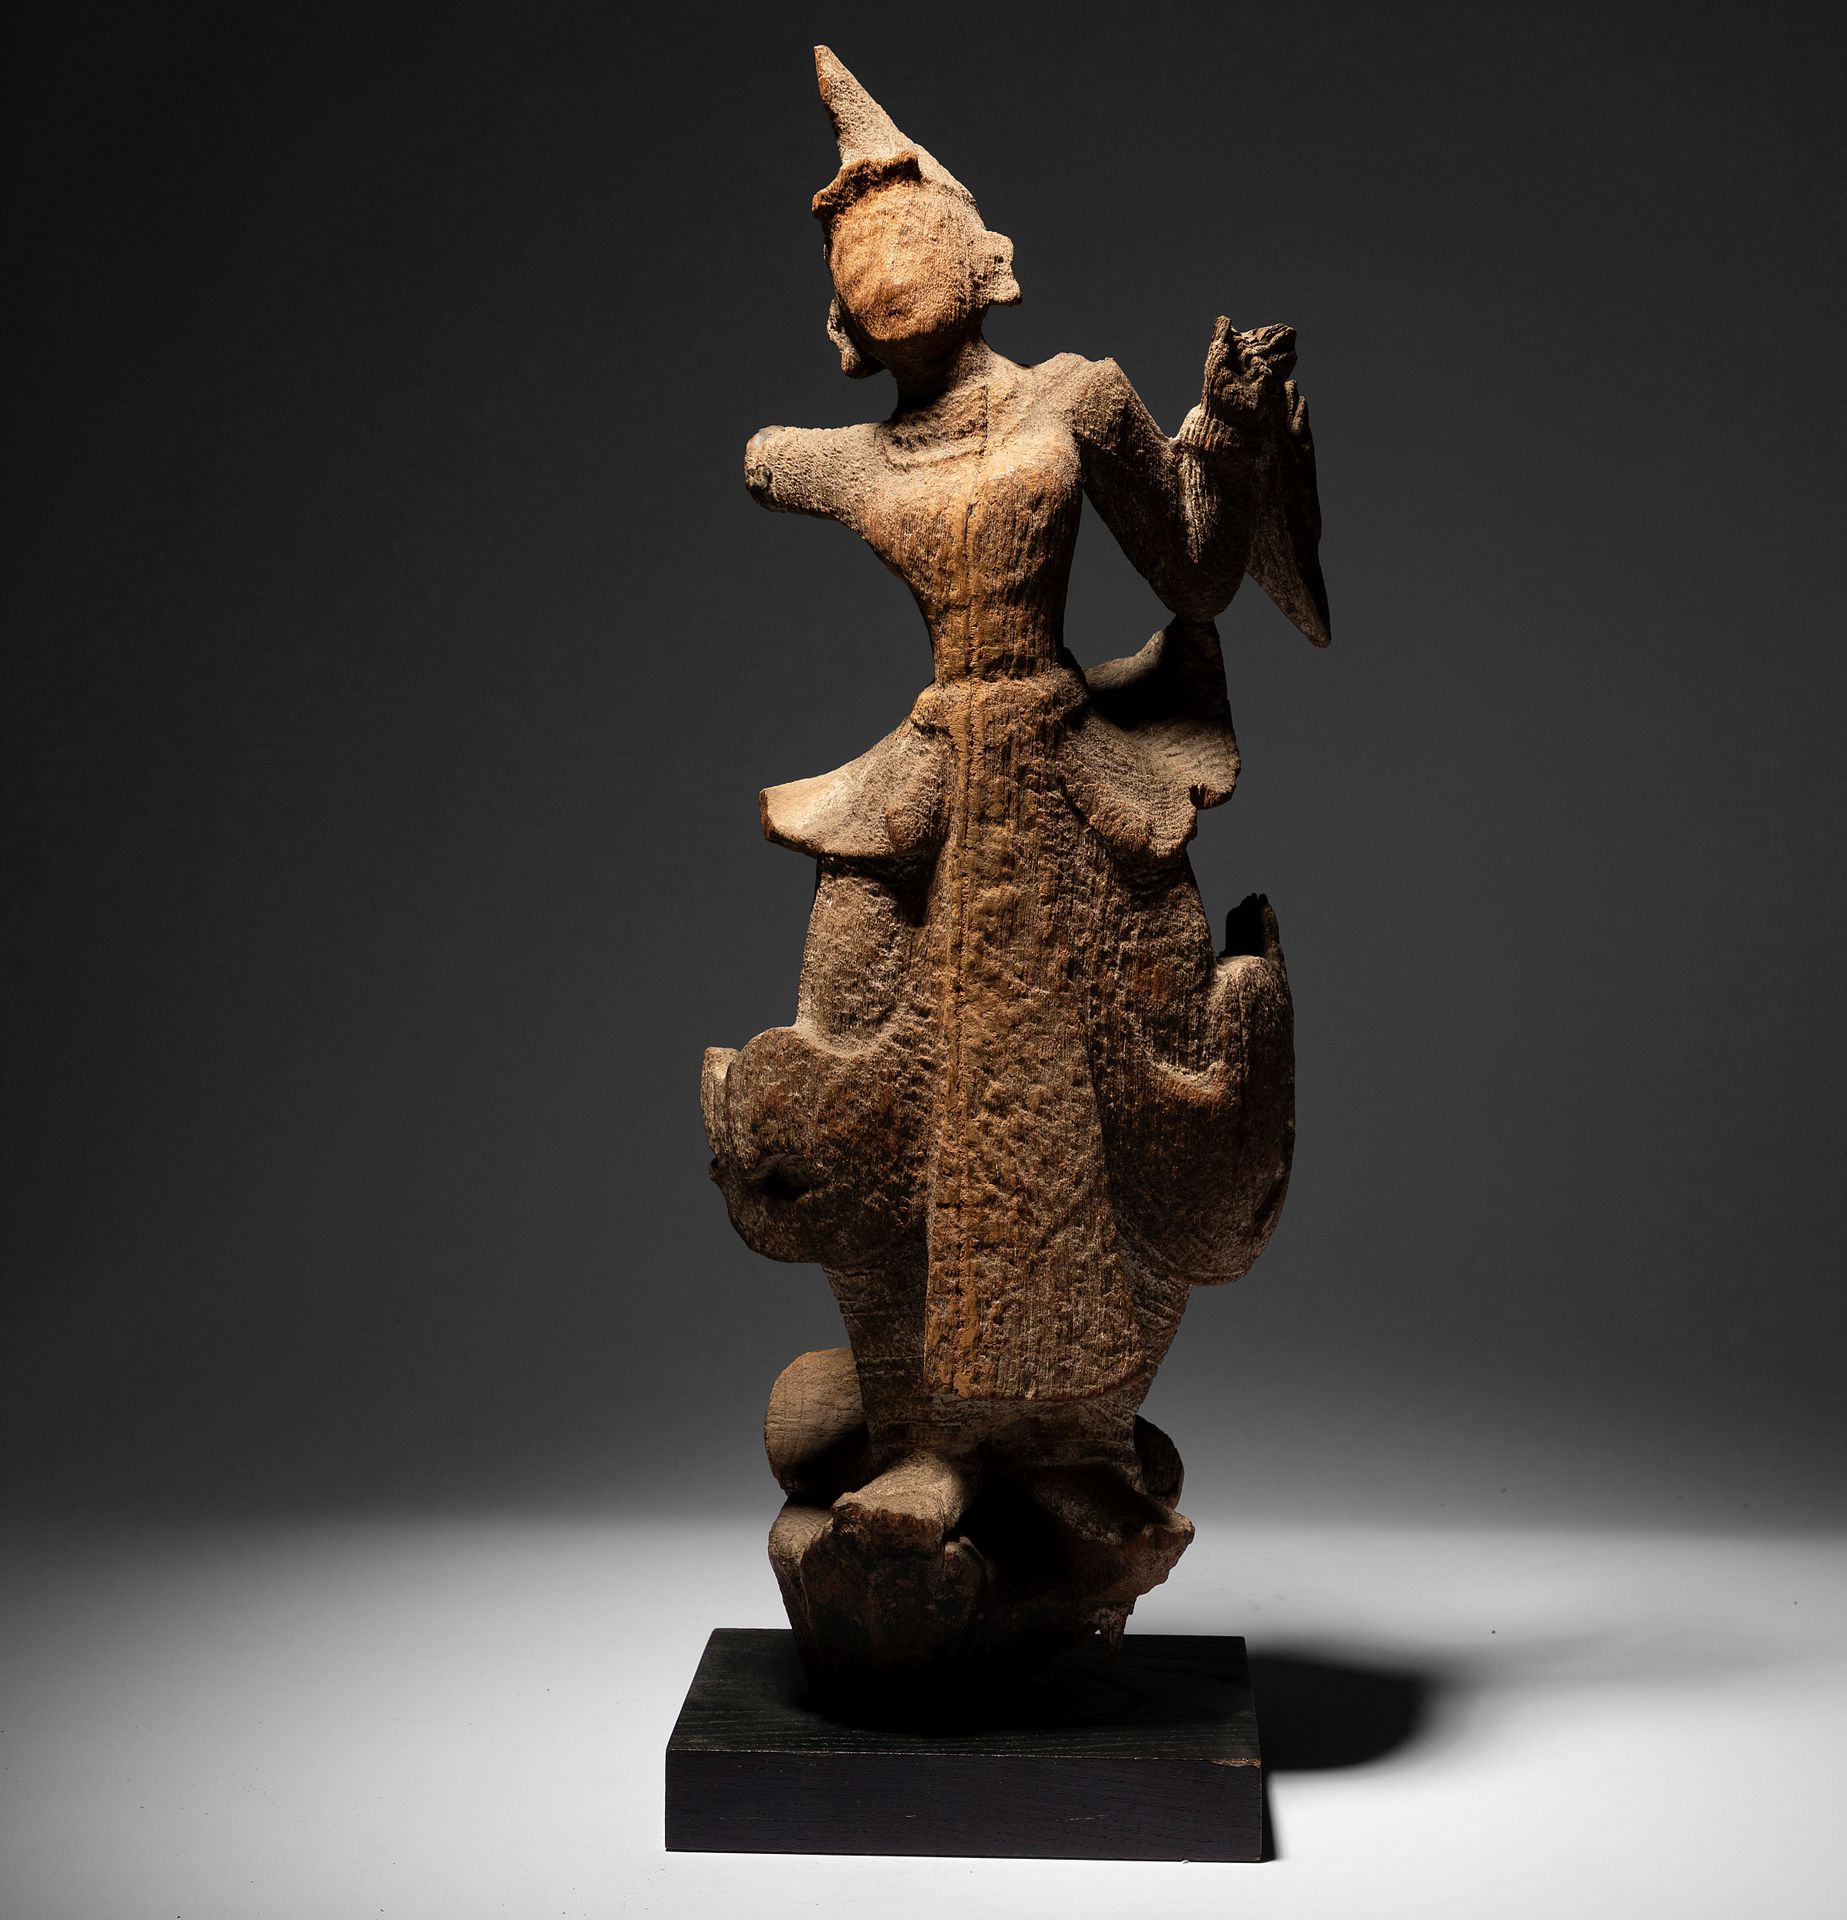 Null A sculpture of Apsara

Burma, 18-19th century

Wood, erosion, visible missi&hellip;